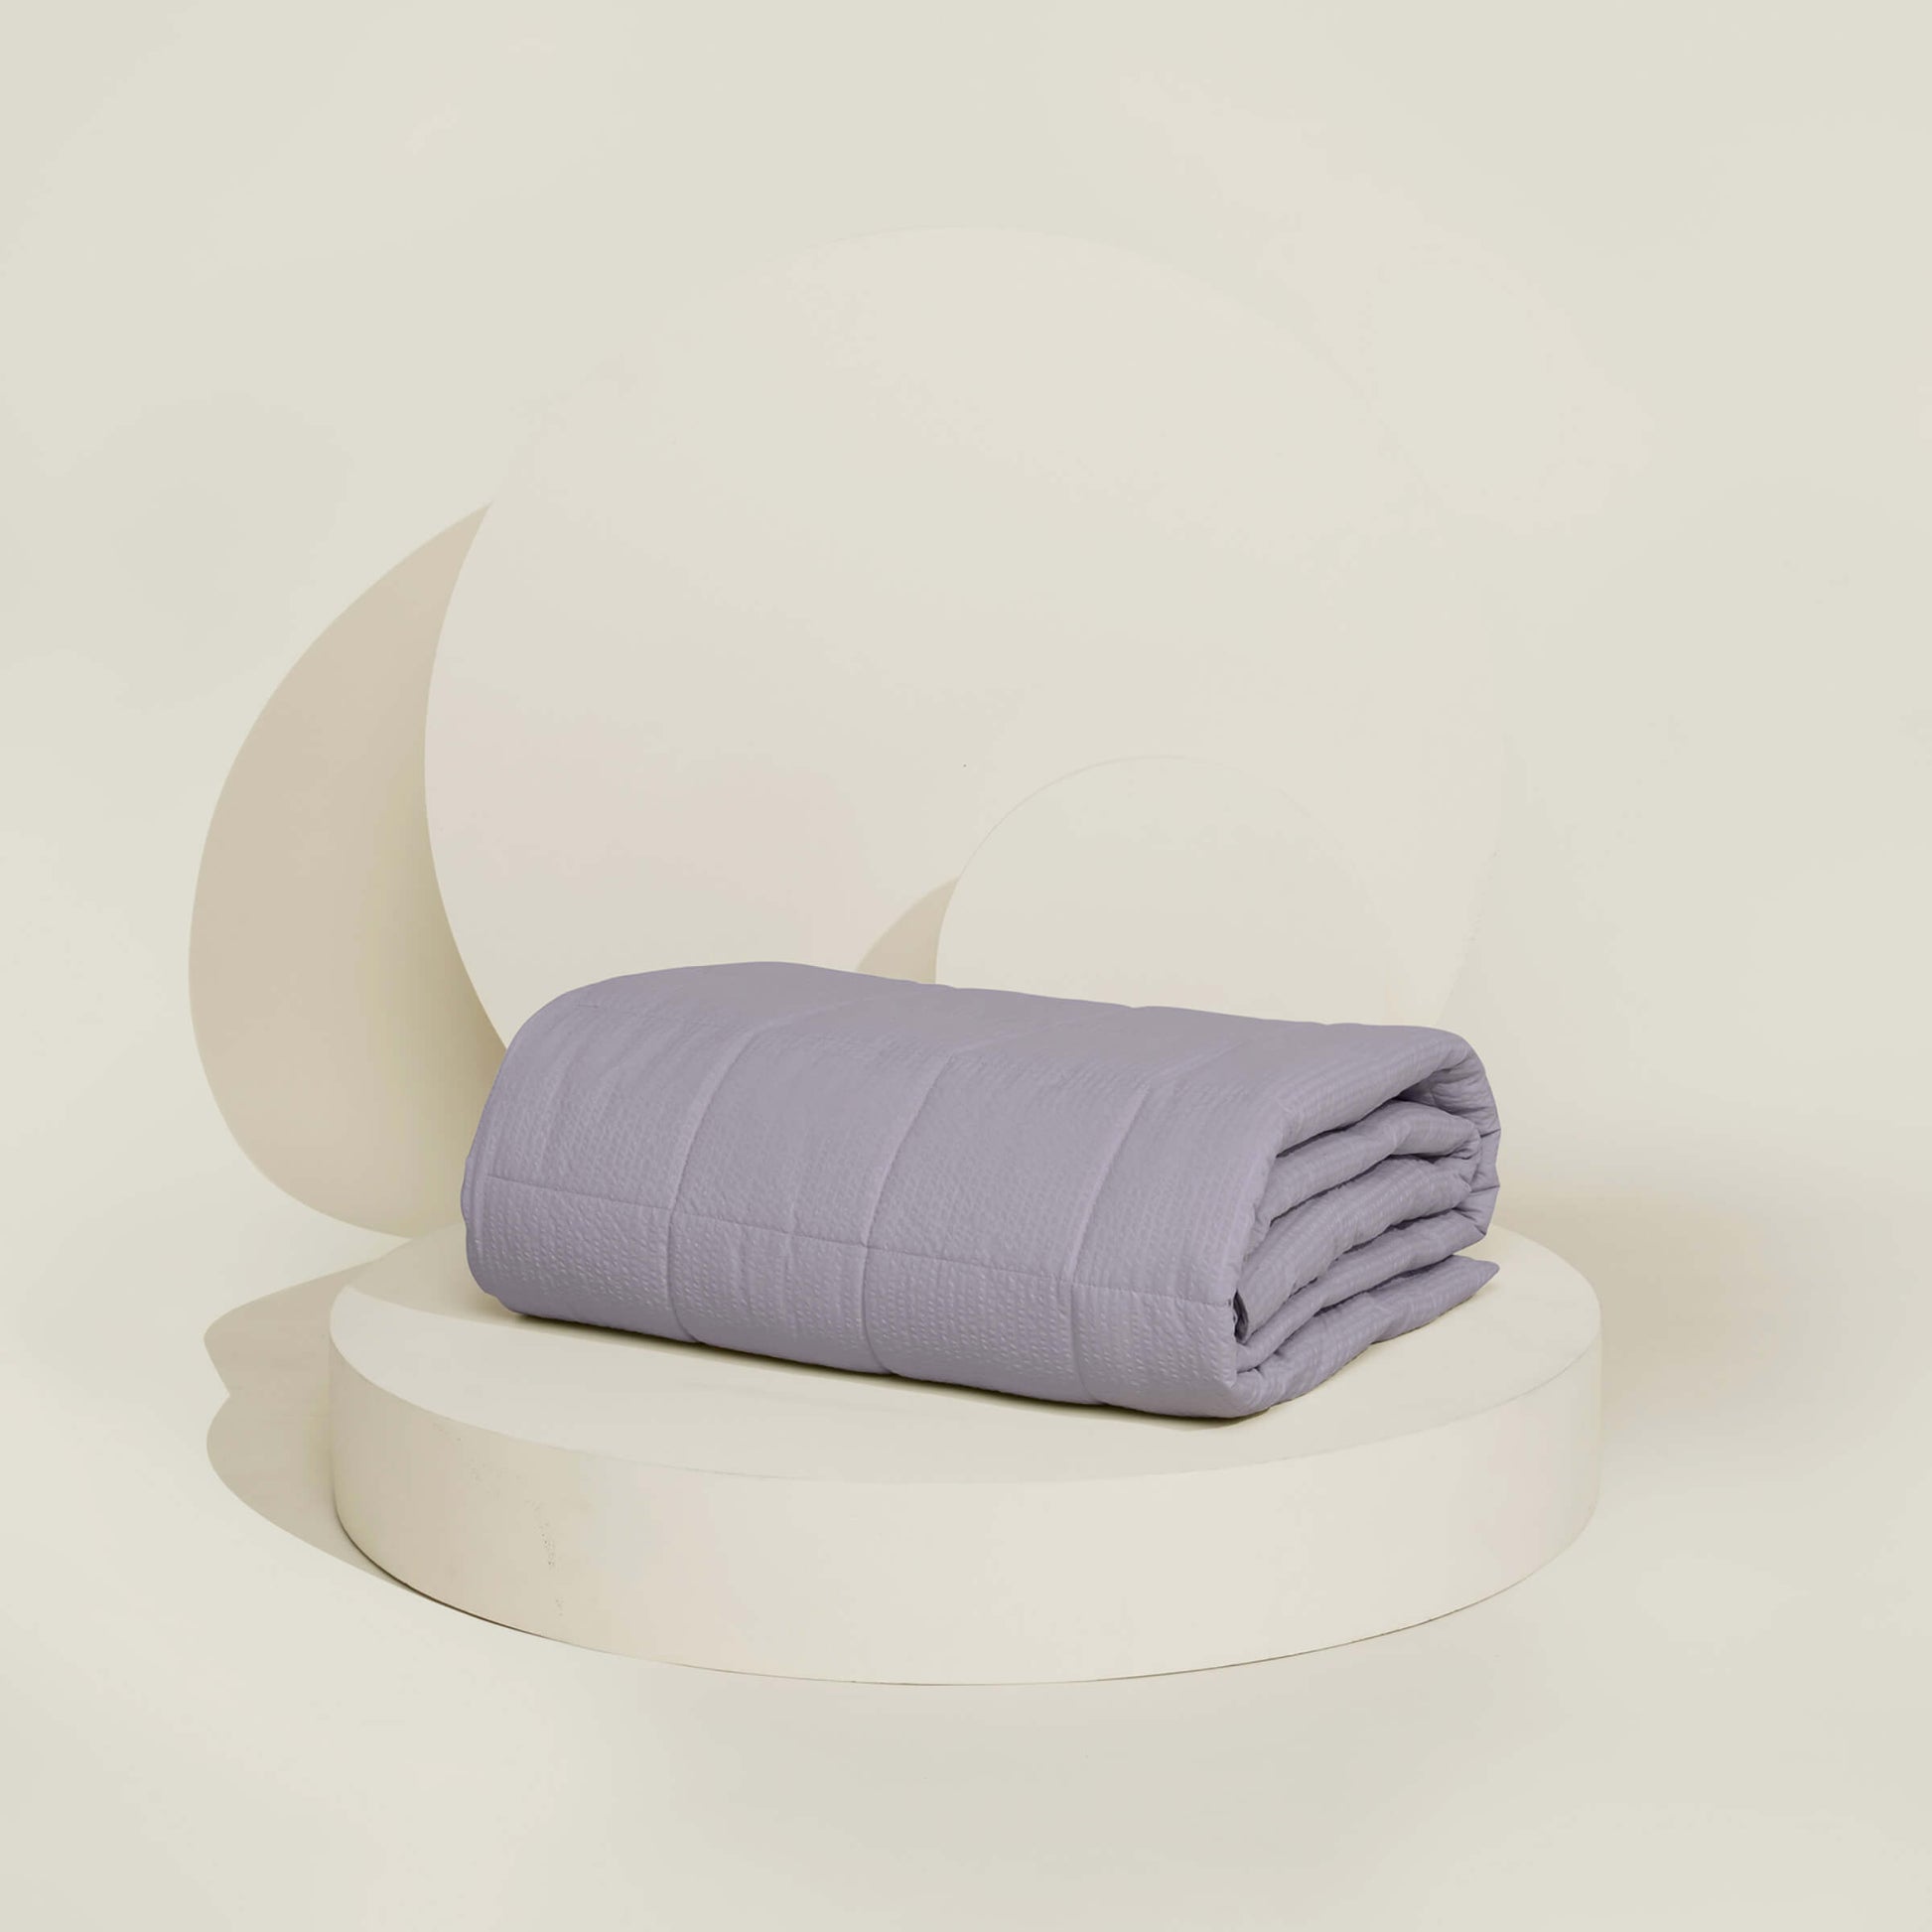 The Slumber Cloud Textured Blanket in Lunar with Outlast® temperature regulation technology to help keep you cool and comfortable throughout the night